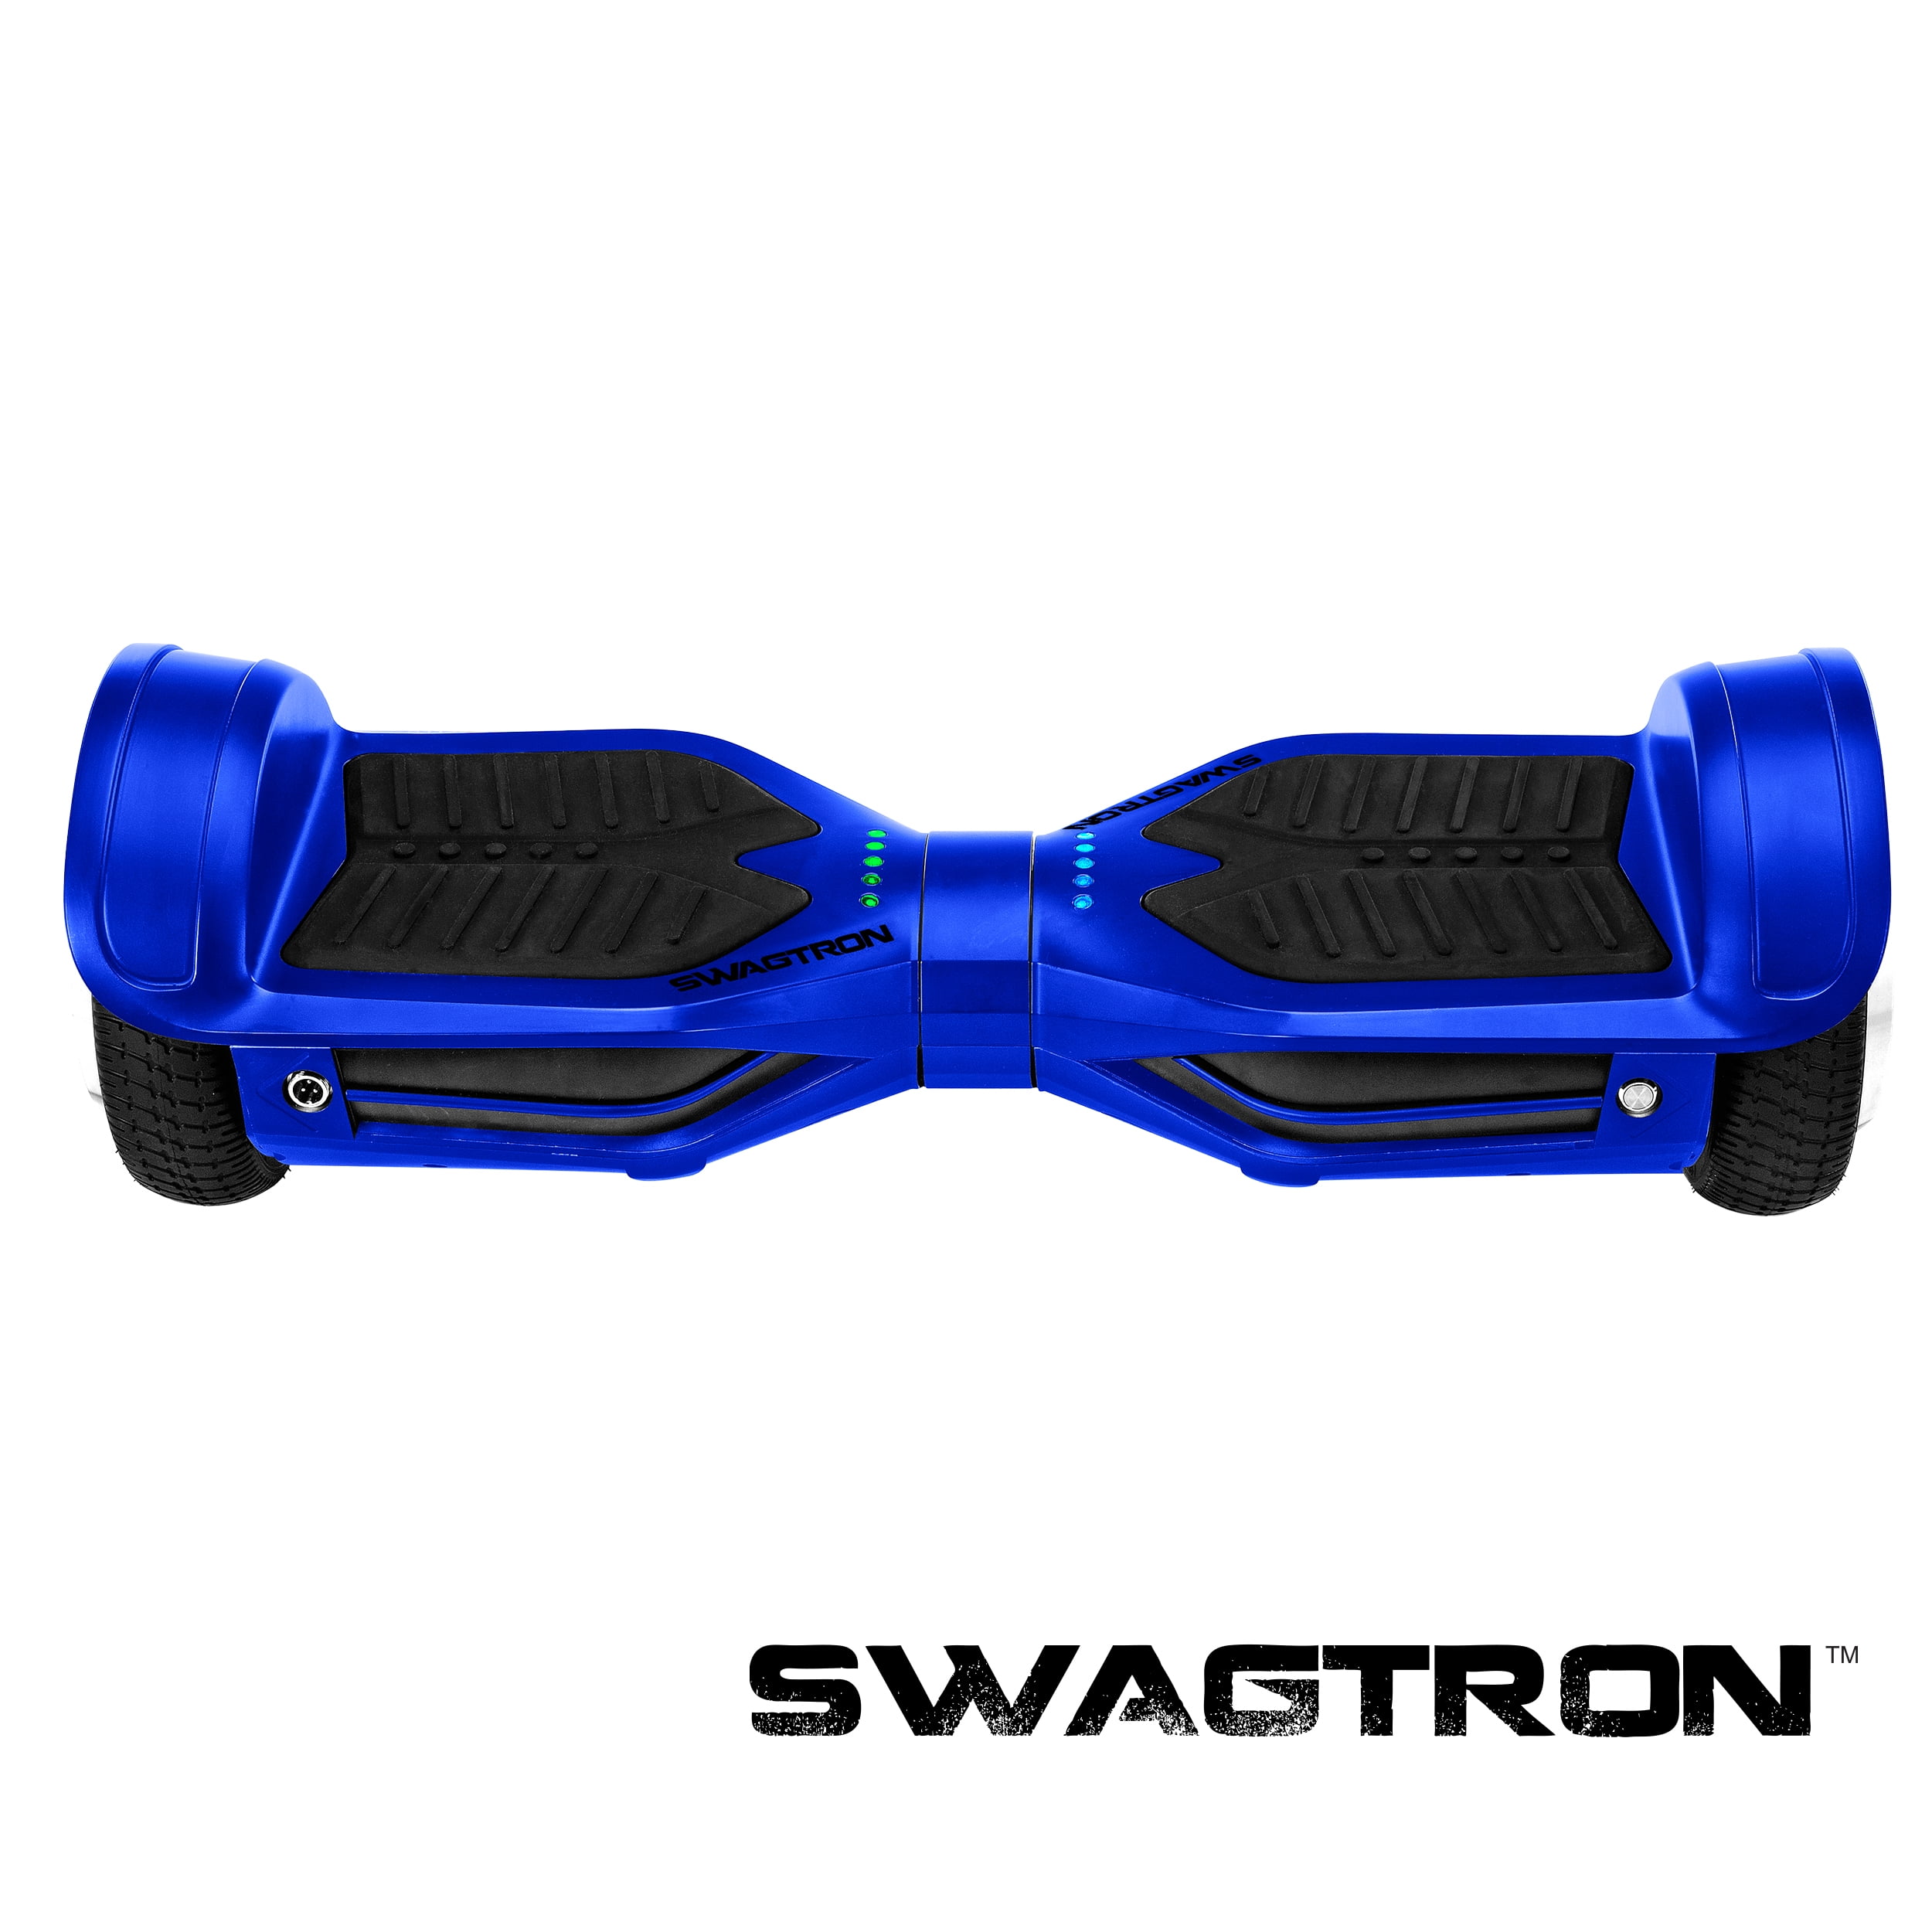 Rubber Fender Bumper Cover Protector Pair for Swagtron T3 Hoverboard in 6 Colors 